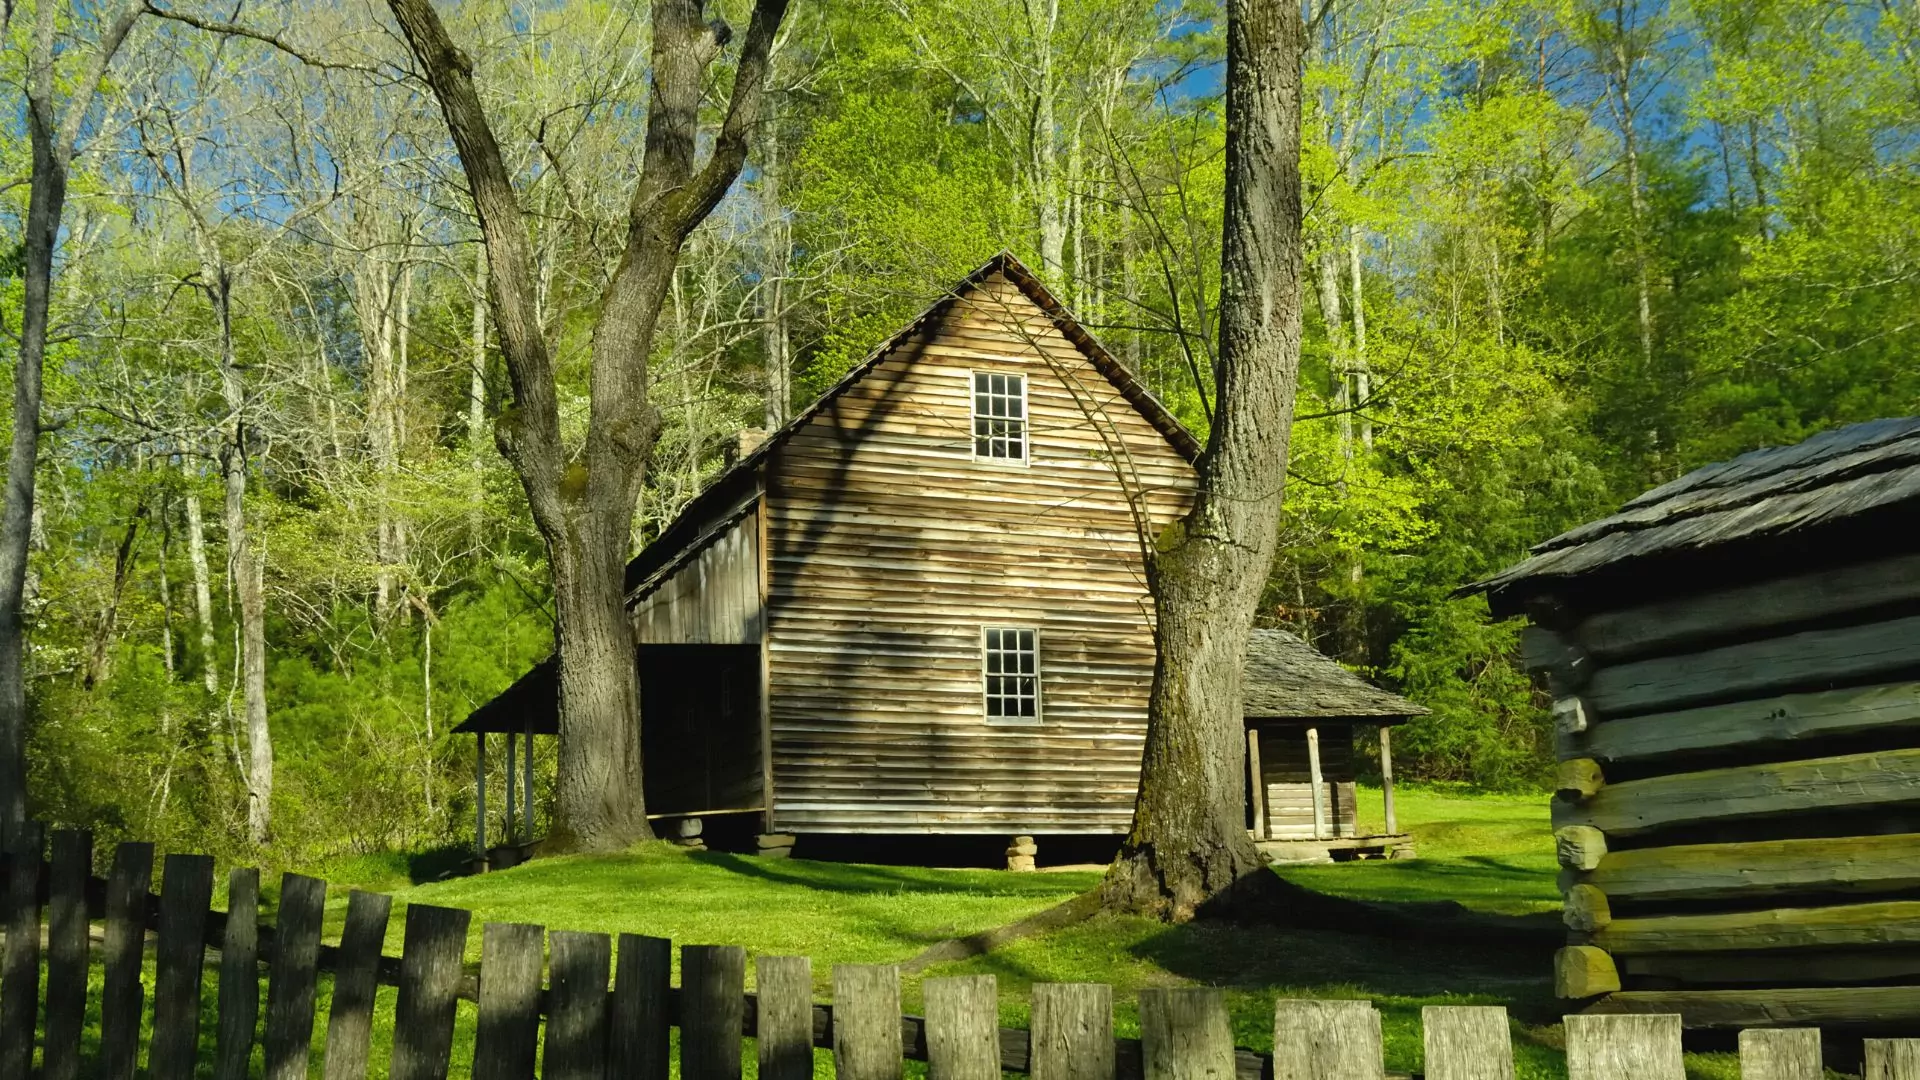 A historic cabin sits among trees just starting to leaf out in early spring